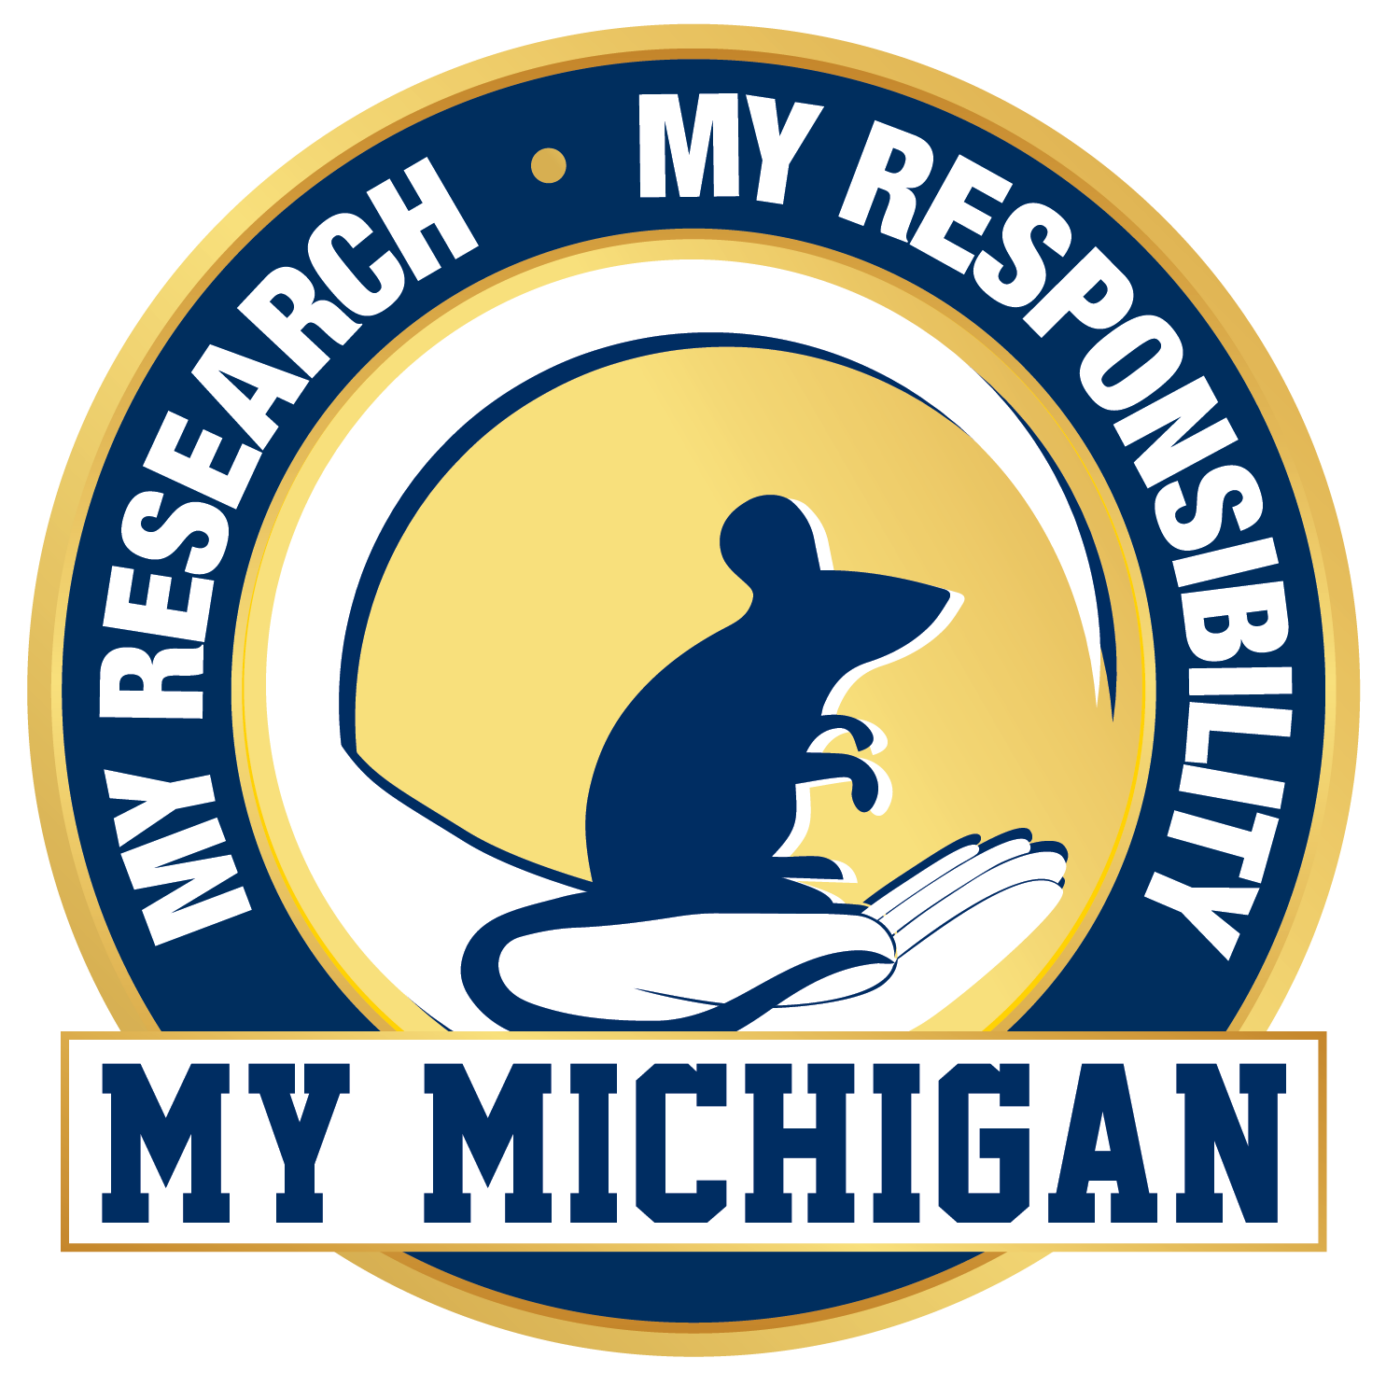 My Research. My Responsibility. My Michigan gold icon